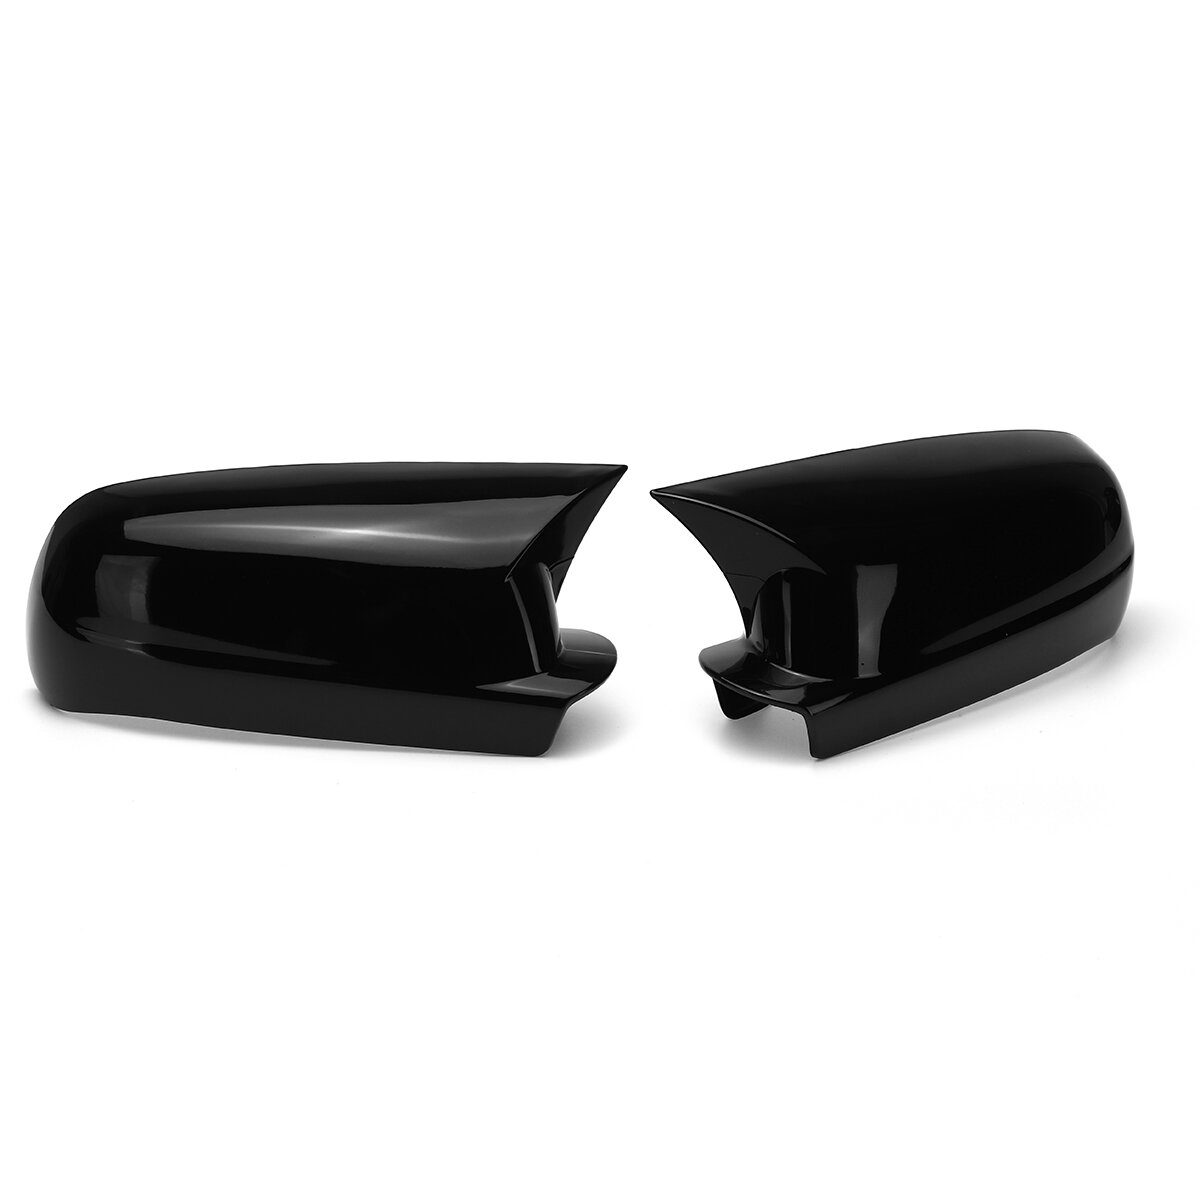 

Add-On Glossy Black Left&Right Side Mirror Cover Caps For VW Golf MK4 1999-2004